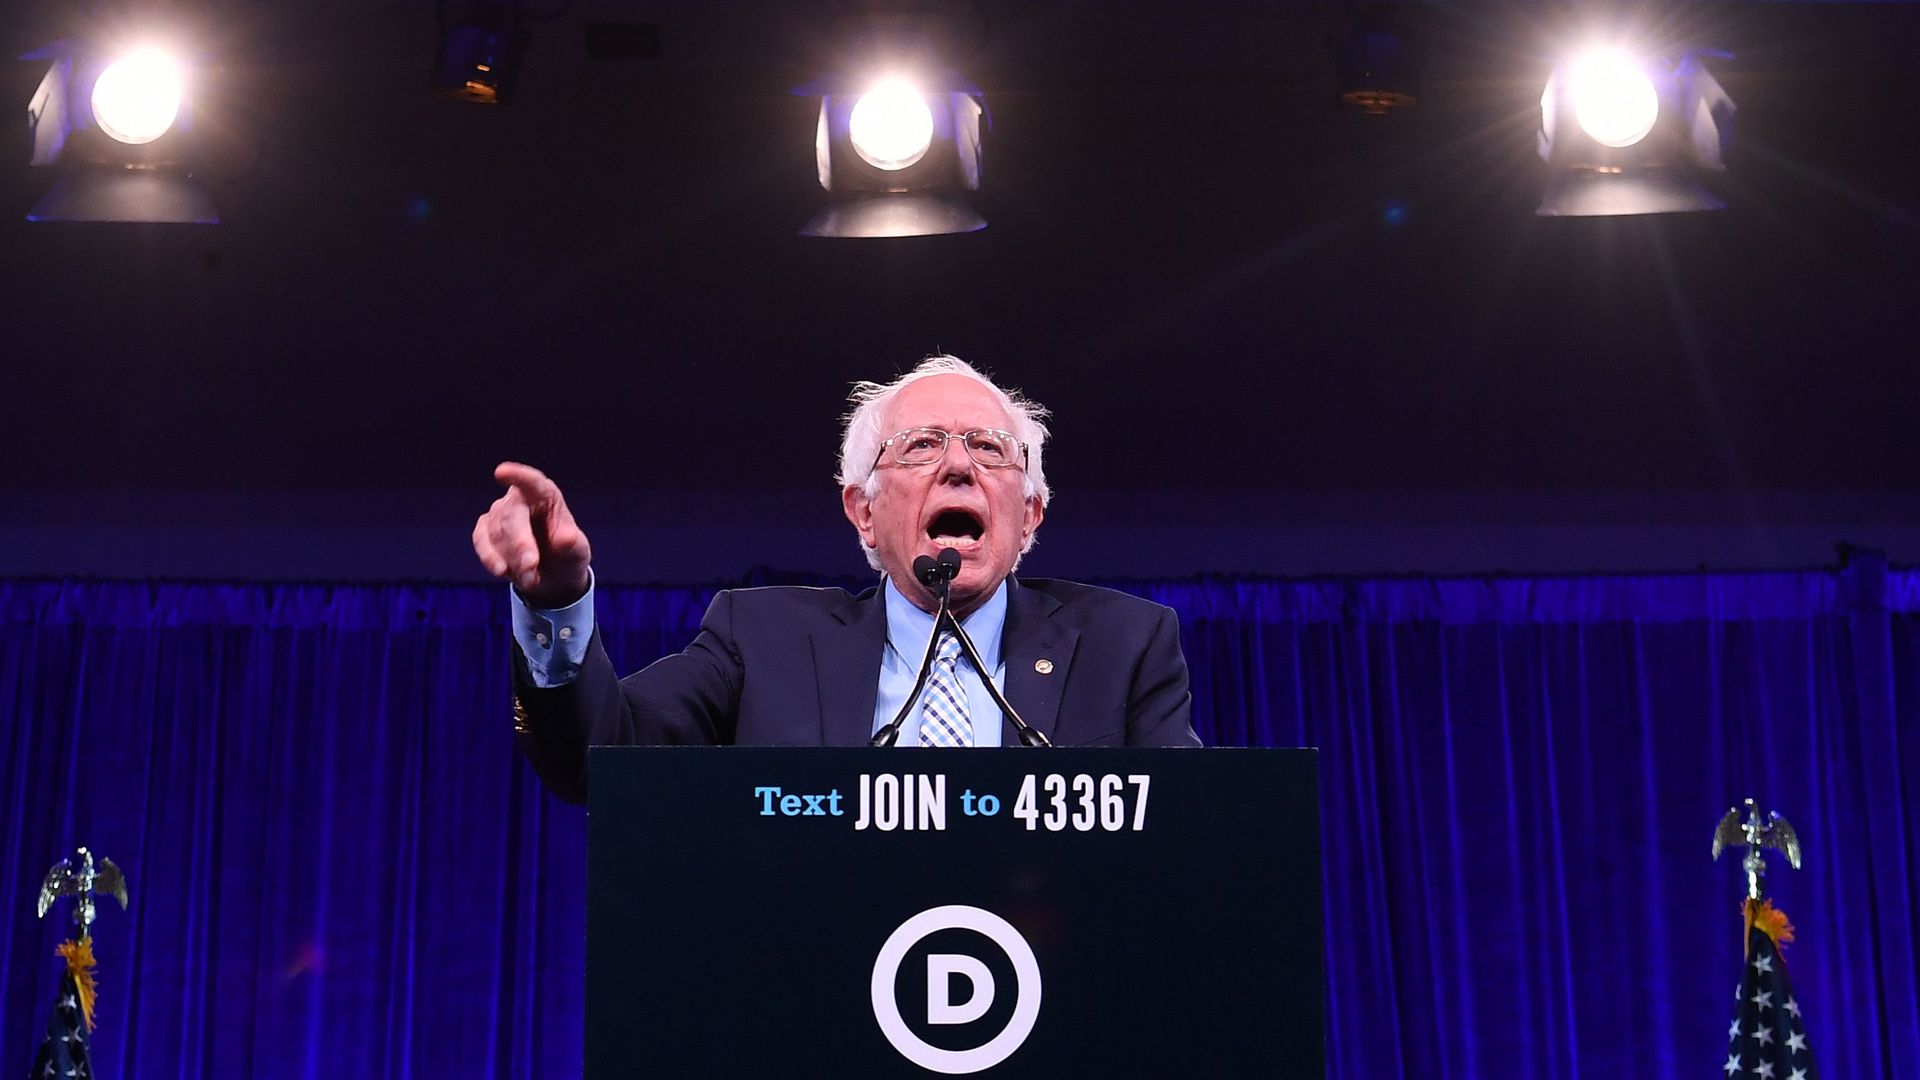  Democratic Presidential hopeful US Senator for Vermont Bernie Sanders speaks on-stage during the Democratic National Committee's summer meeting in San Francisco, California on August 23, 2019.